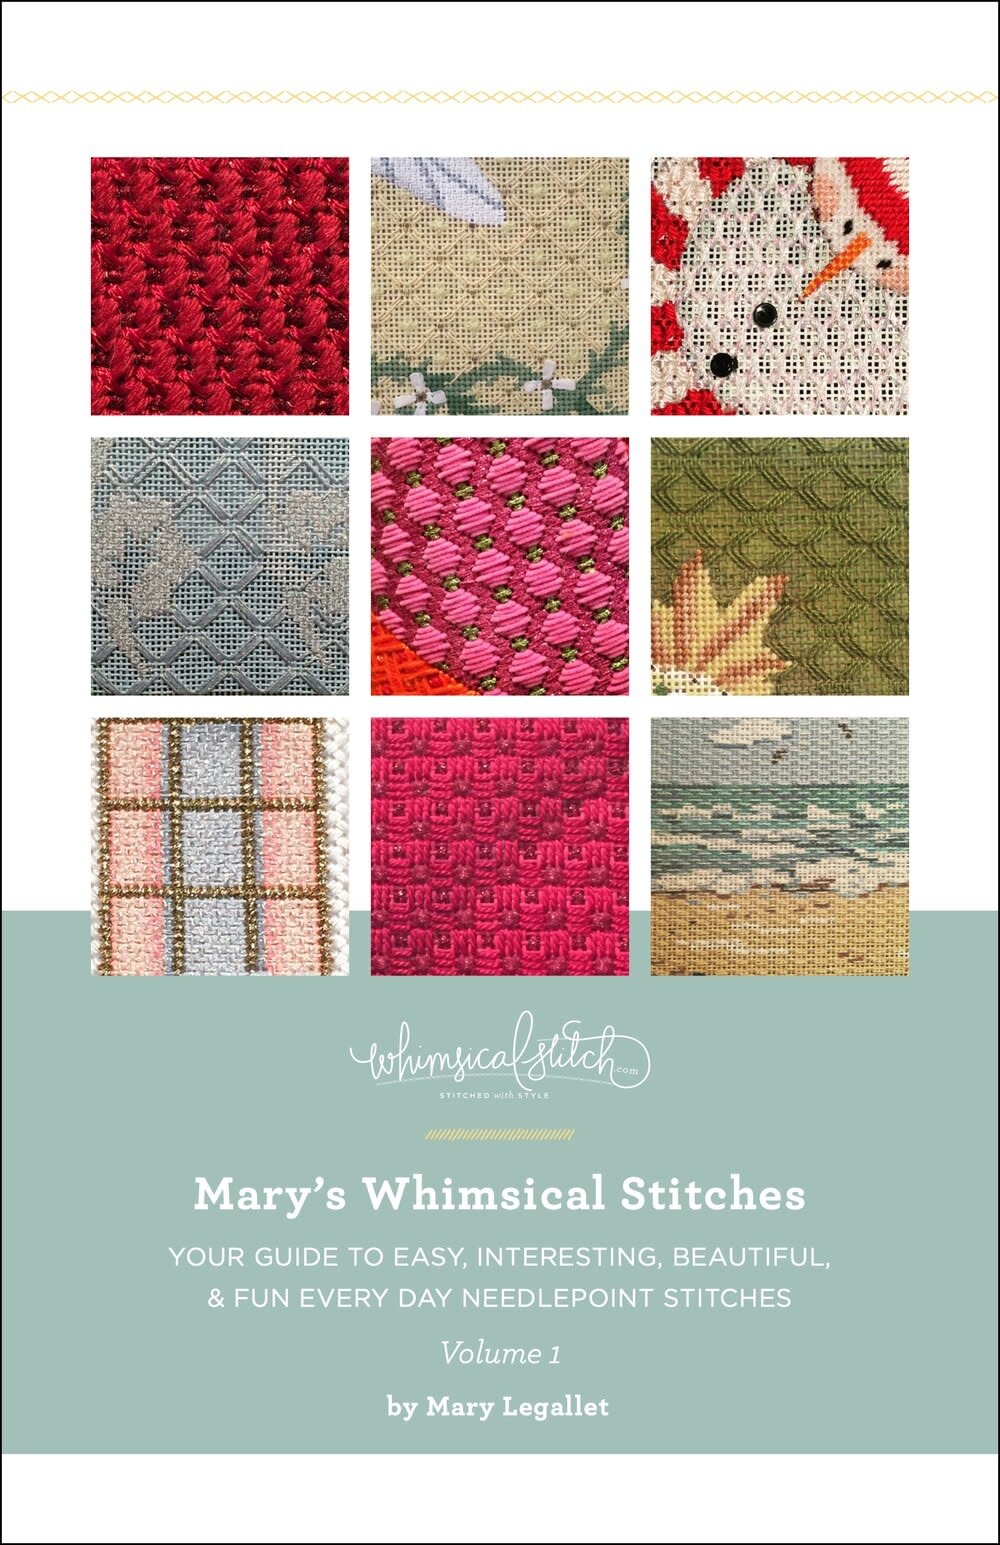 Mary's Whimsical Stitches, Volume 3 – Chaparral Needlework